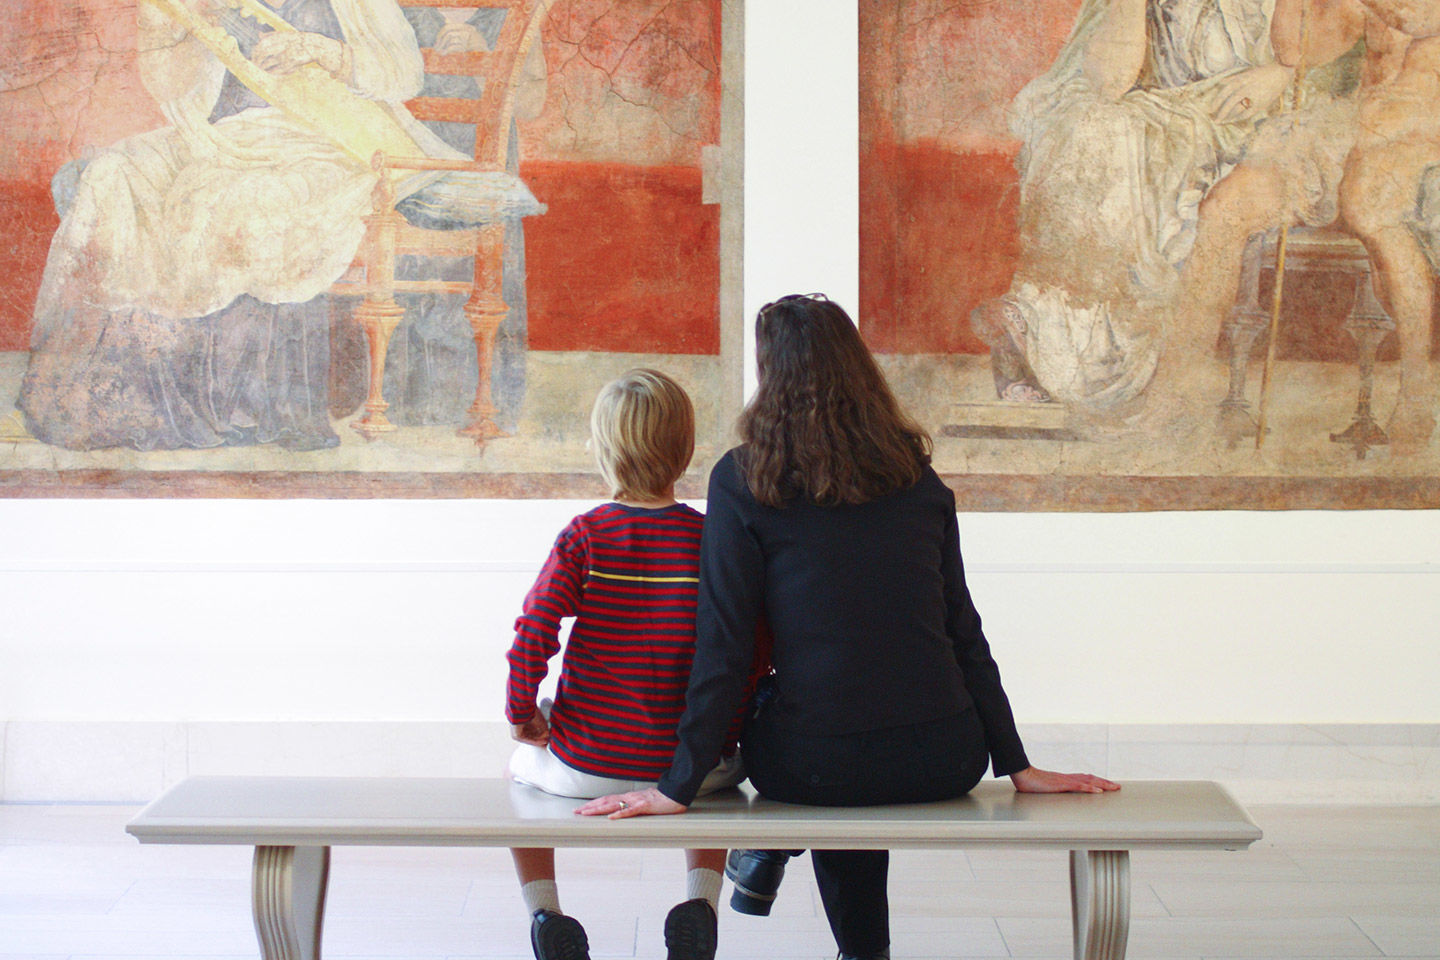 A woman and a child sit close together on a bench in a gallery looking at frescoes